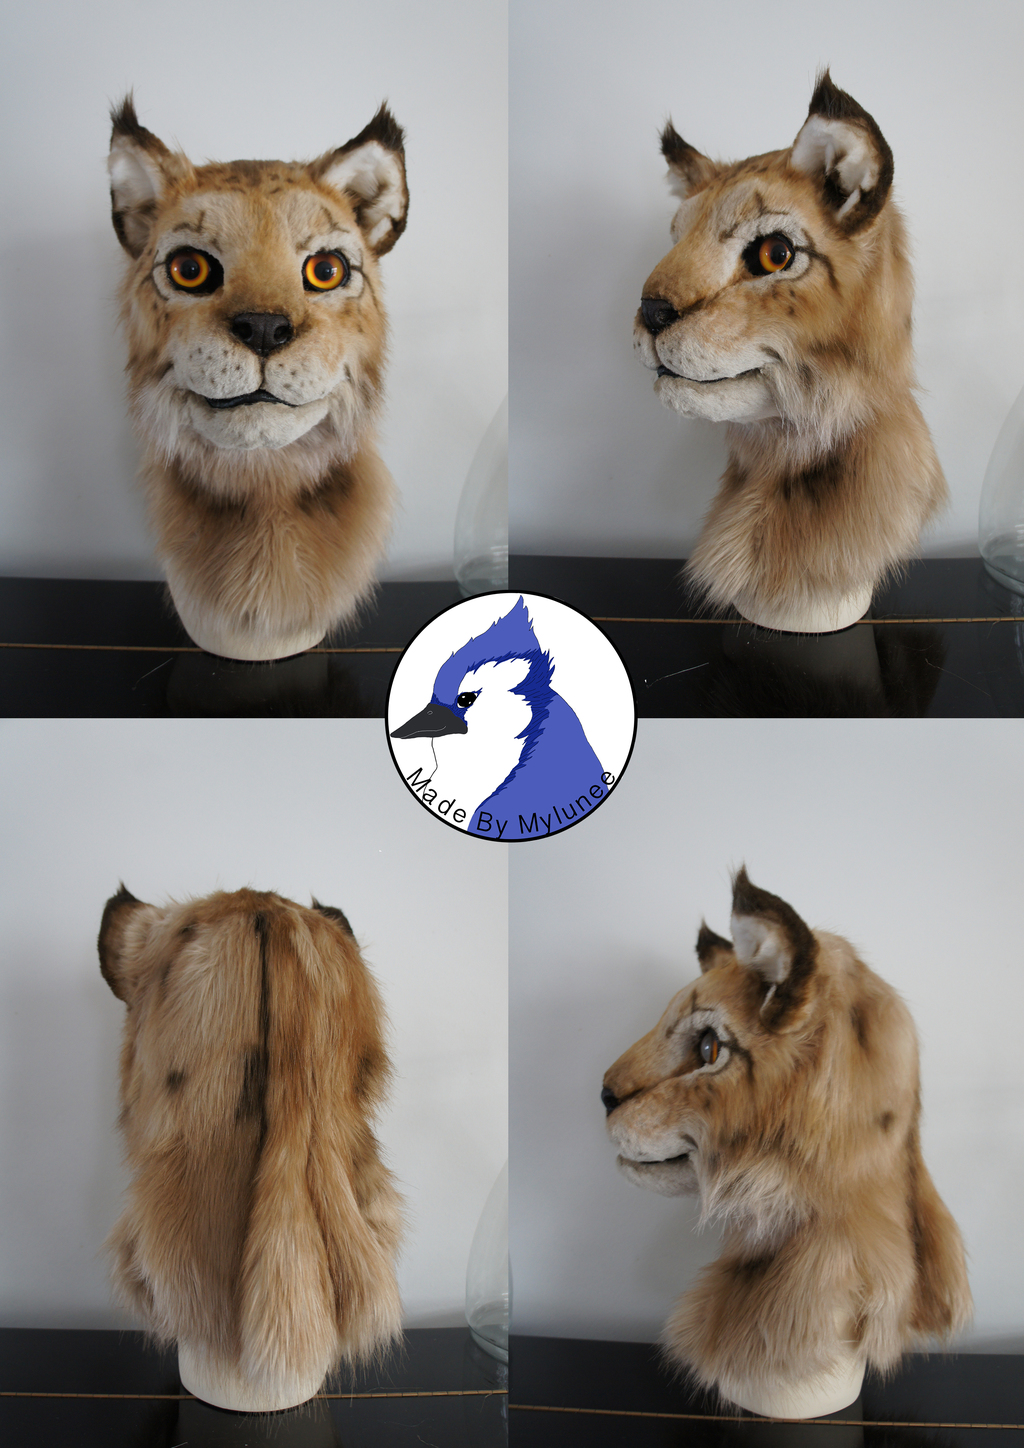 Most recent image: Eurasian Lynx Collage